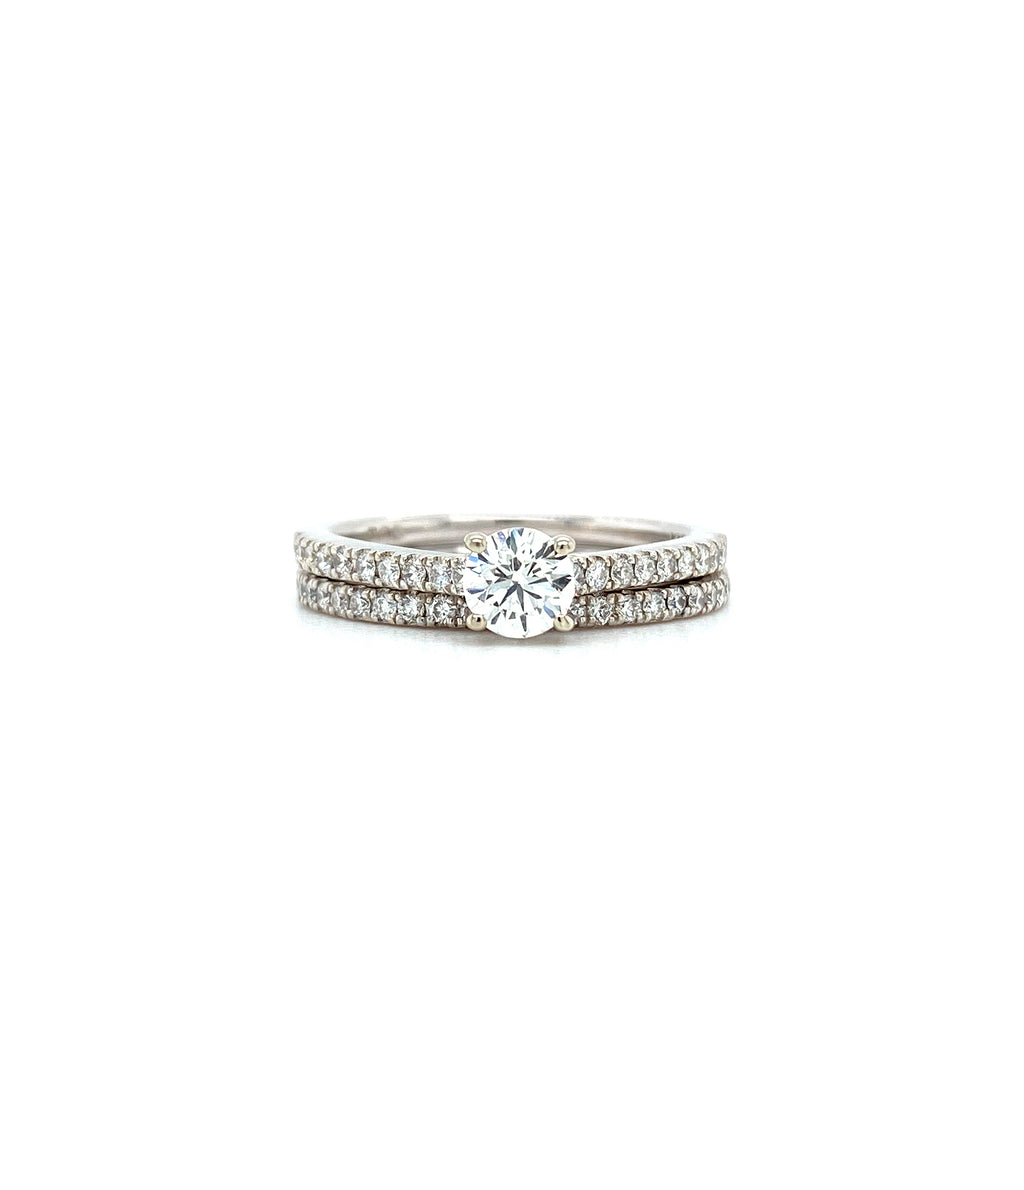 14K WHITE GOLD SOLITAIRE STACKED DIAMOND ENGAGEMENT RING